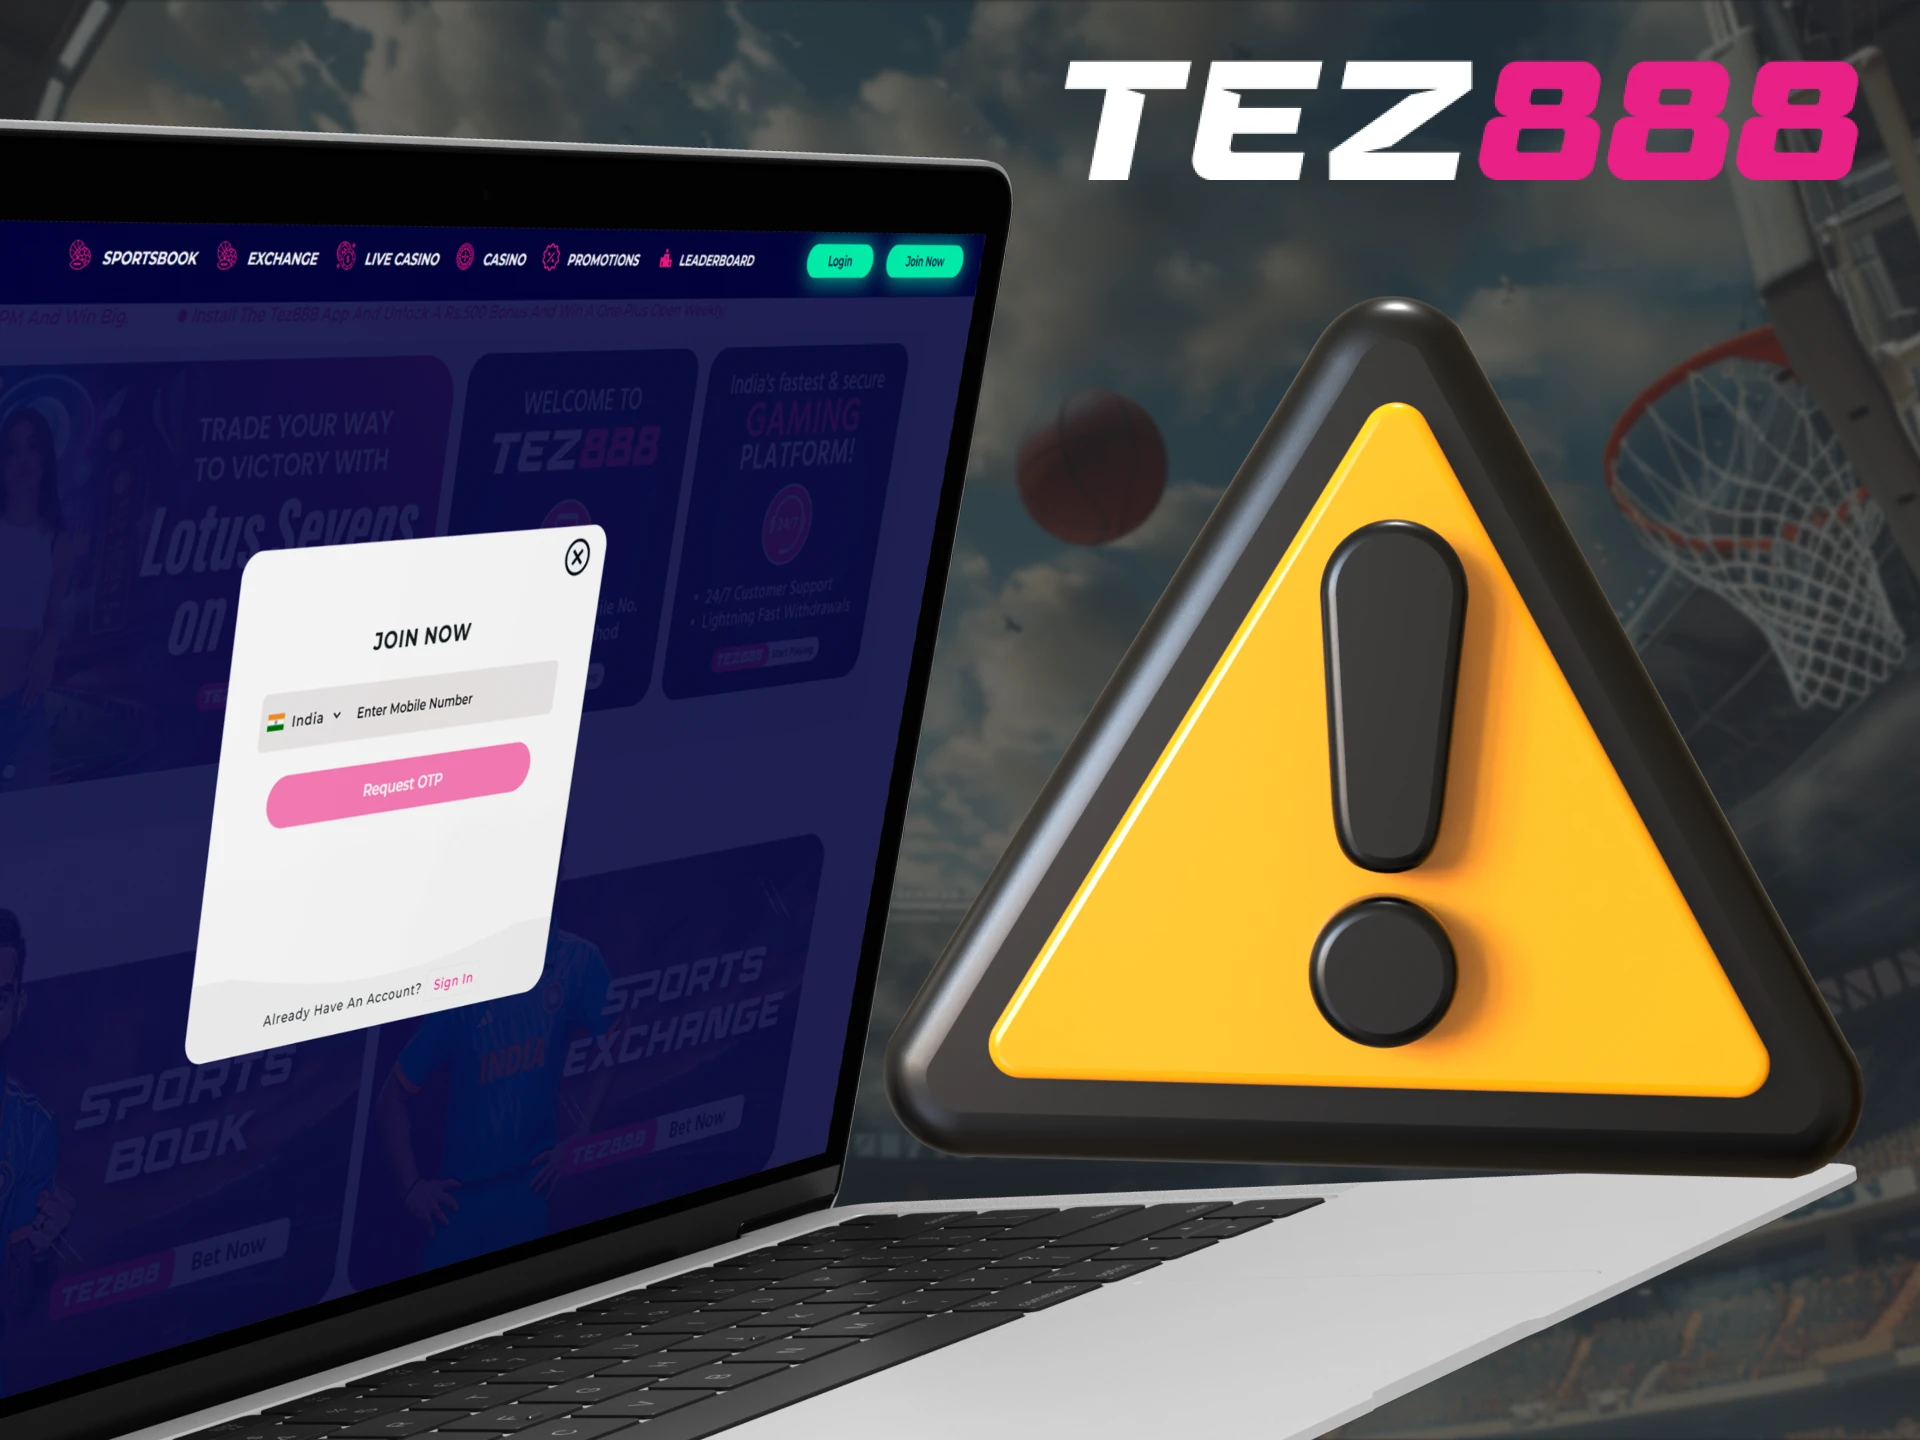 Here are the common problems at Tez88 casino when registering.